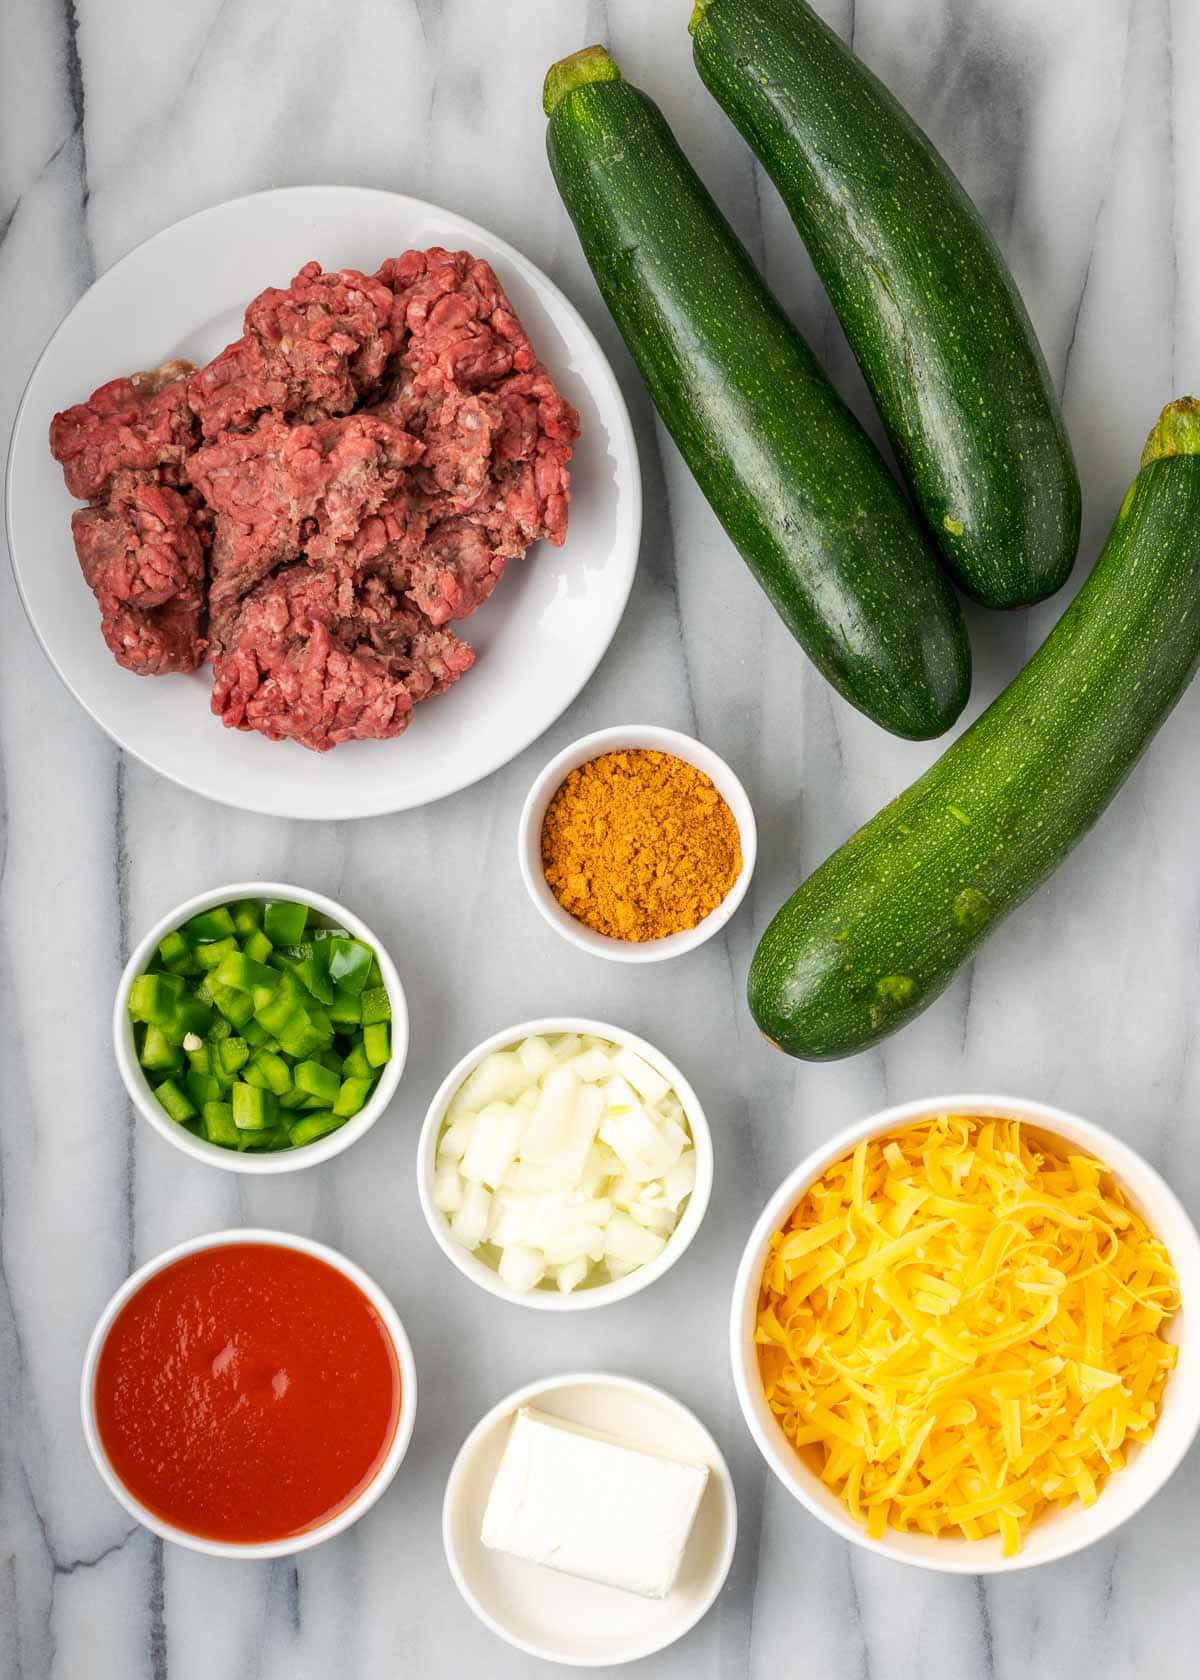 ingredients for stuffed zucchini